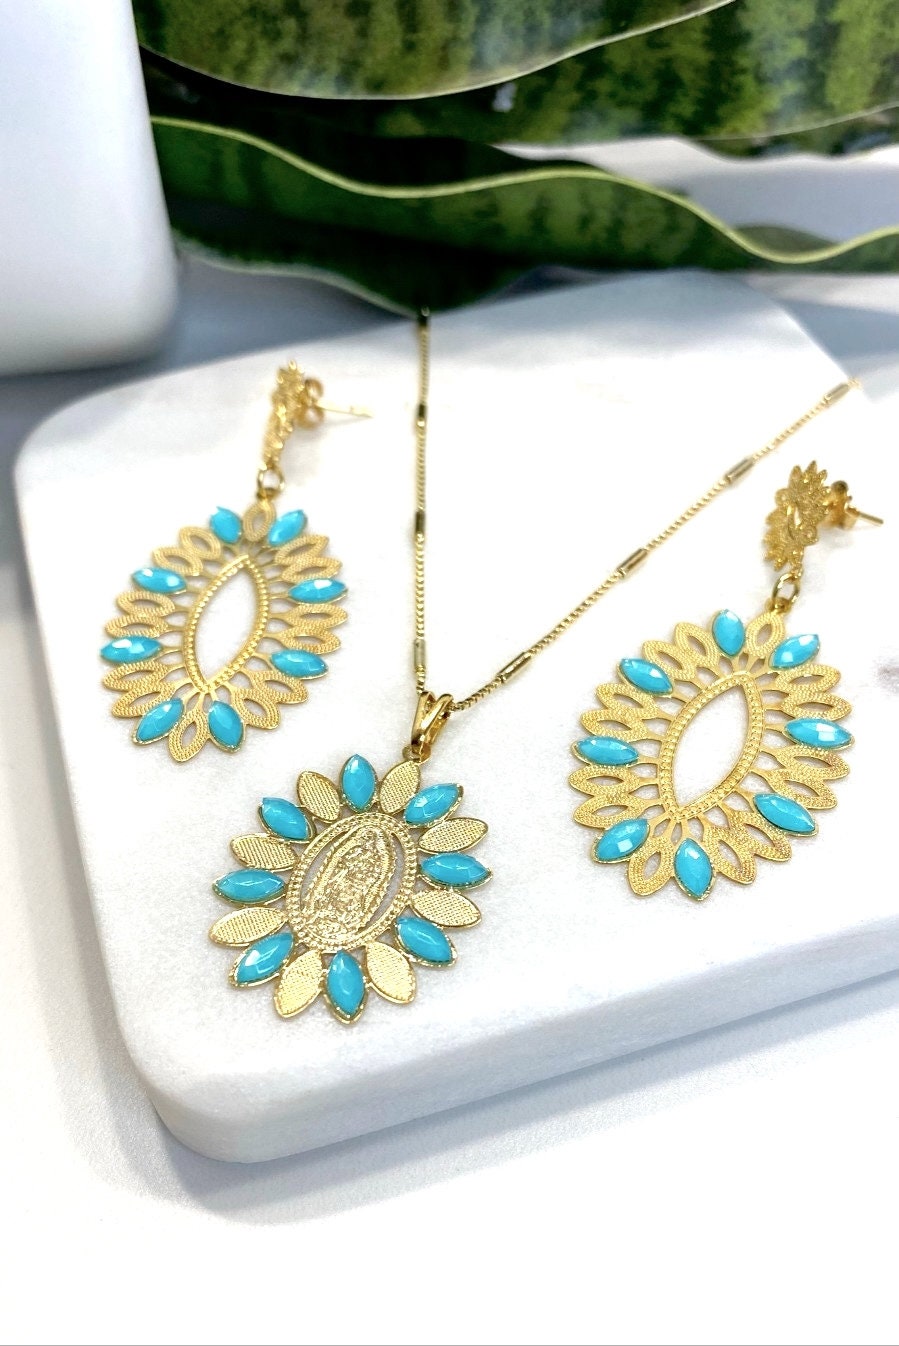 18k Gold Filled, Oval Flower, Guadalupe Virgin, Light Blue, Ivory, Black and Blue Set, 1mm Bar Box Chain, Wholesale Jewelry Supplies